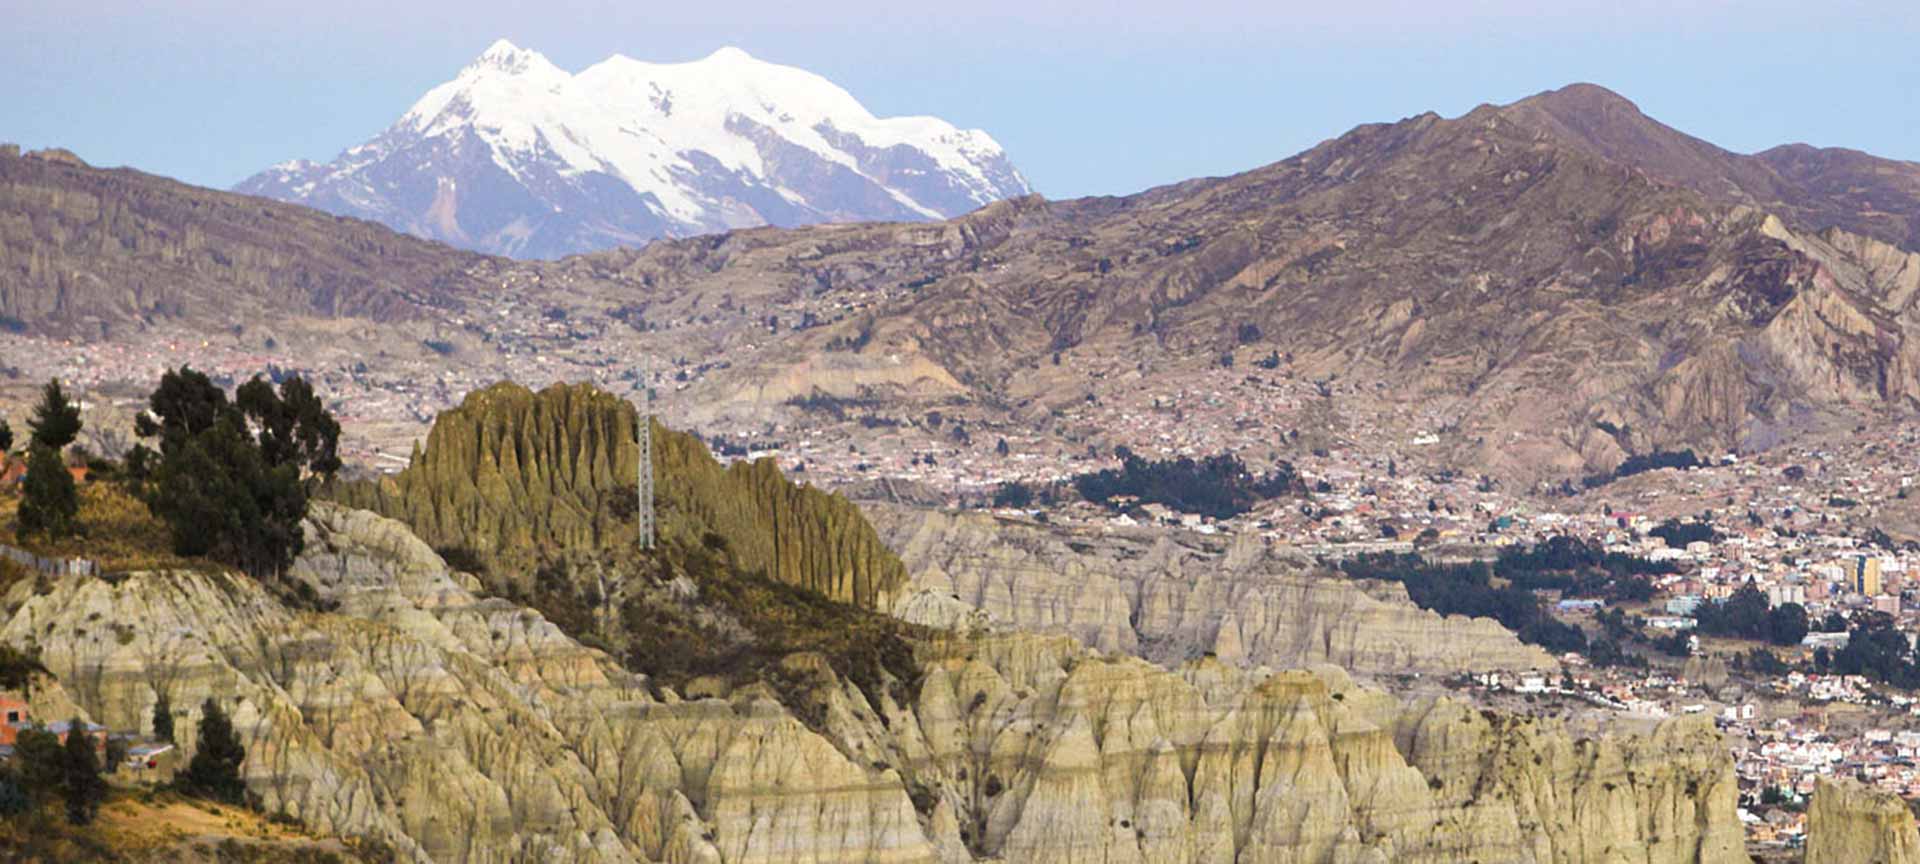 Mountains and landscape in Bolivia.